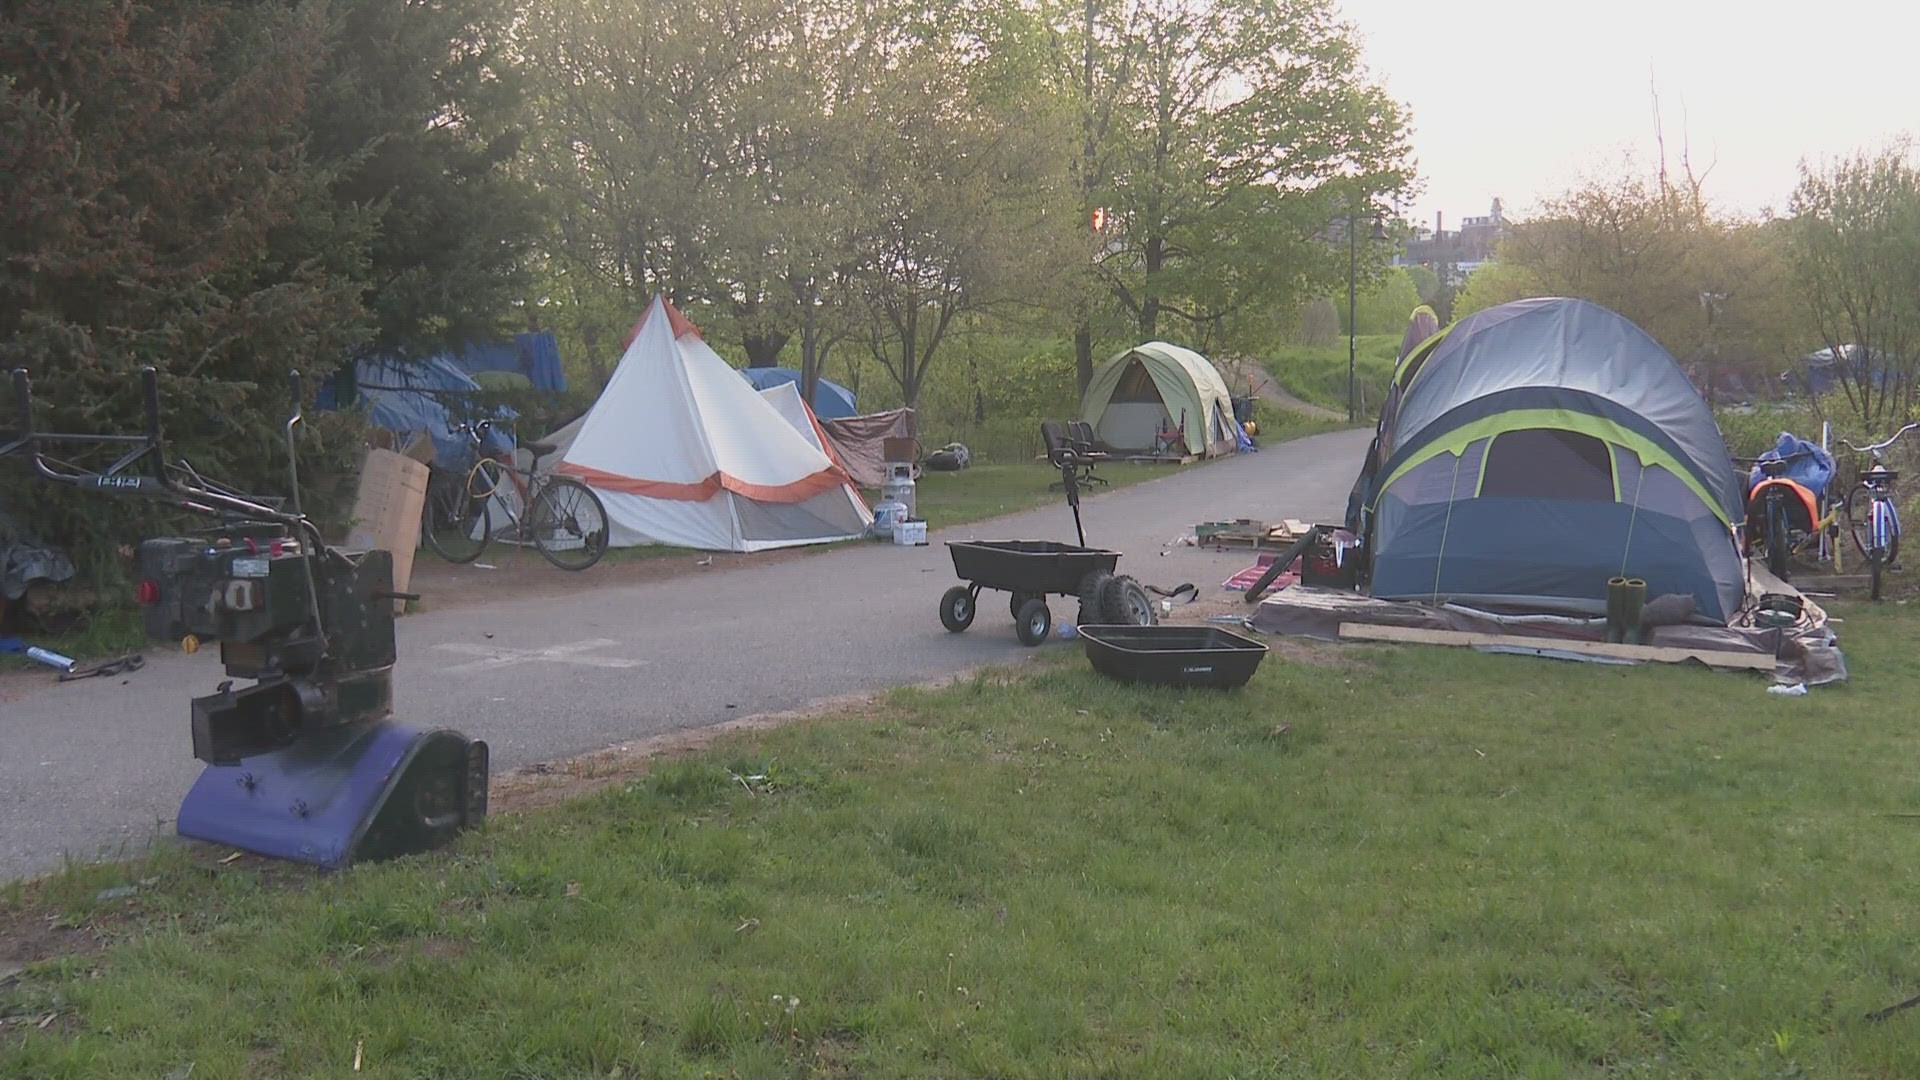 Despite shelter space in Portland being full most nights, the city said it will offer people staying at a 50-tent encampment shelter before closing it by September.